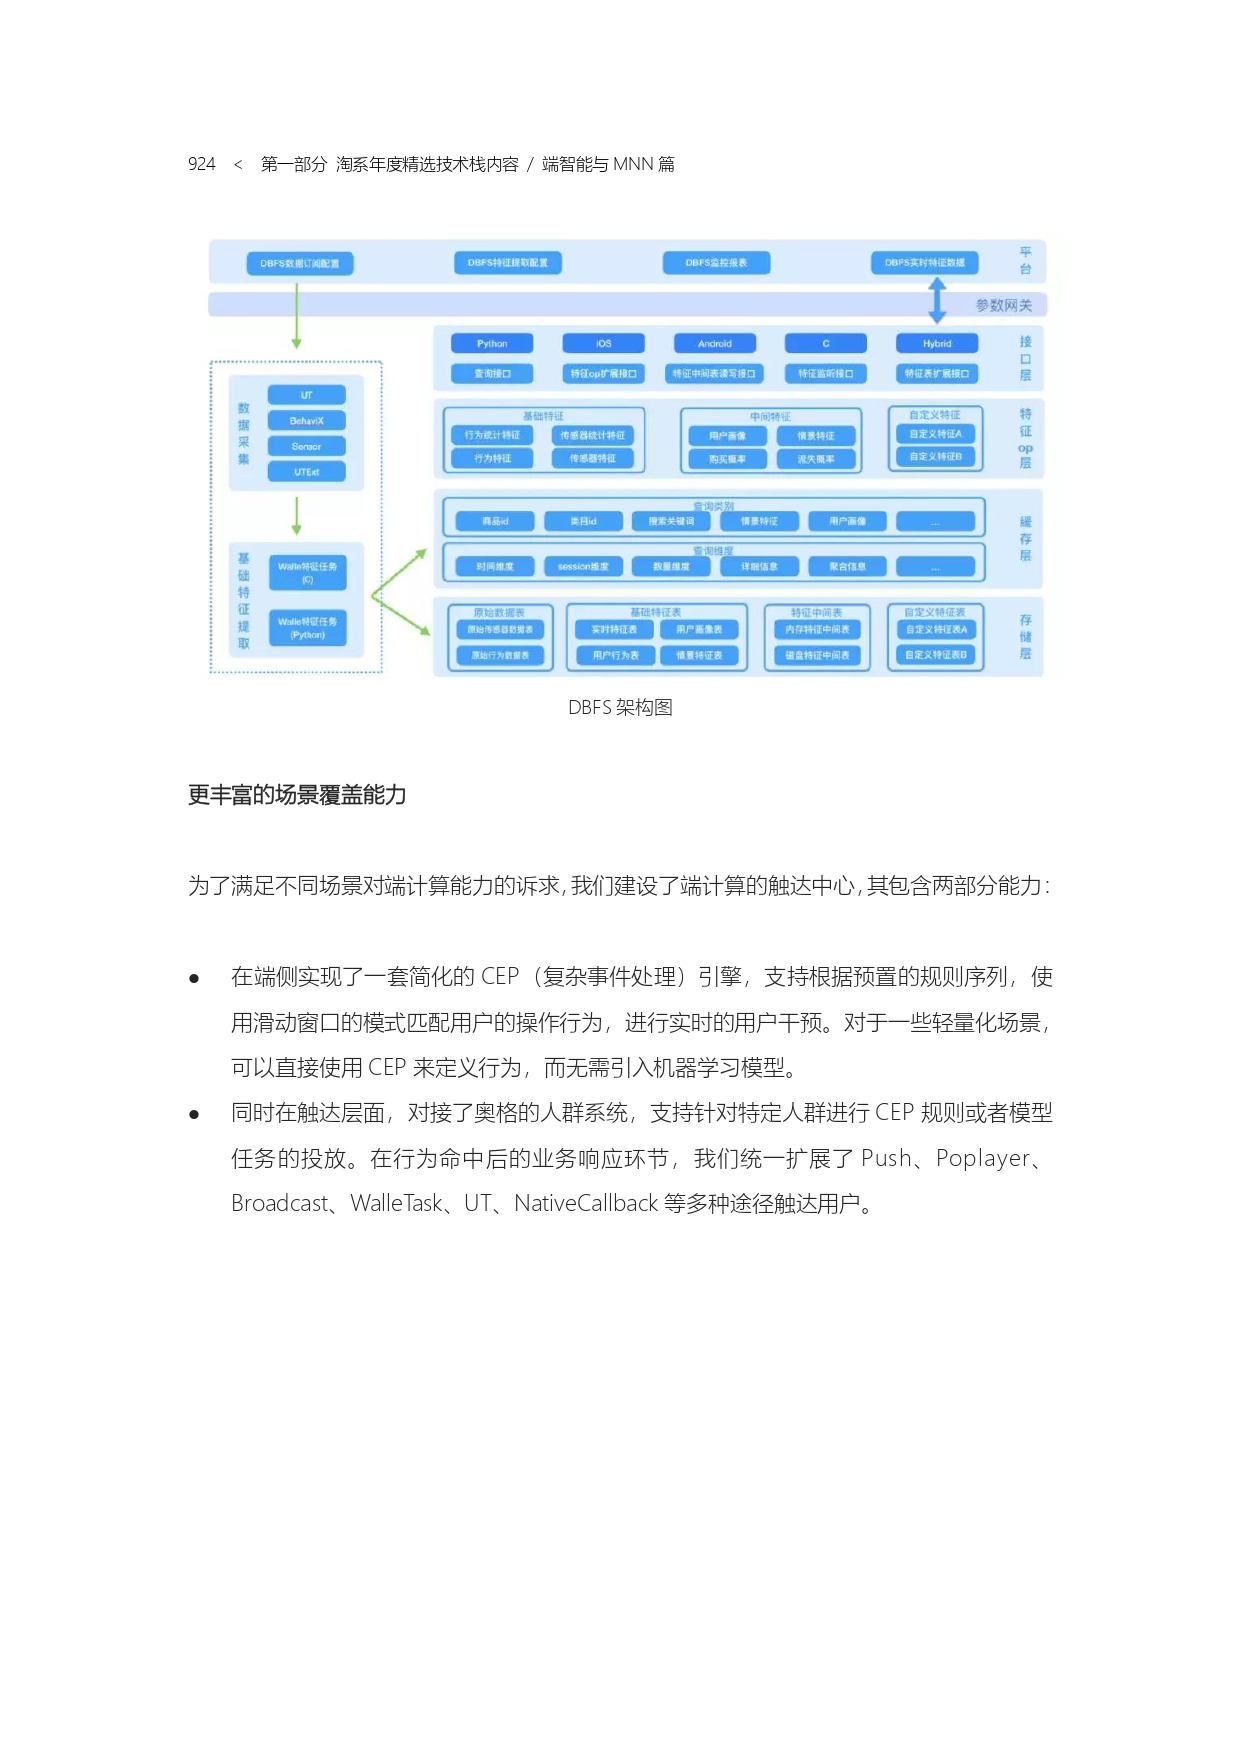 The Complete Works of Tao Technology 2020-571-1189-301-619_page-0054.jpg